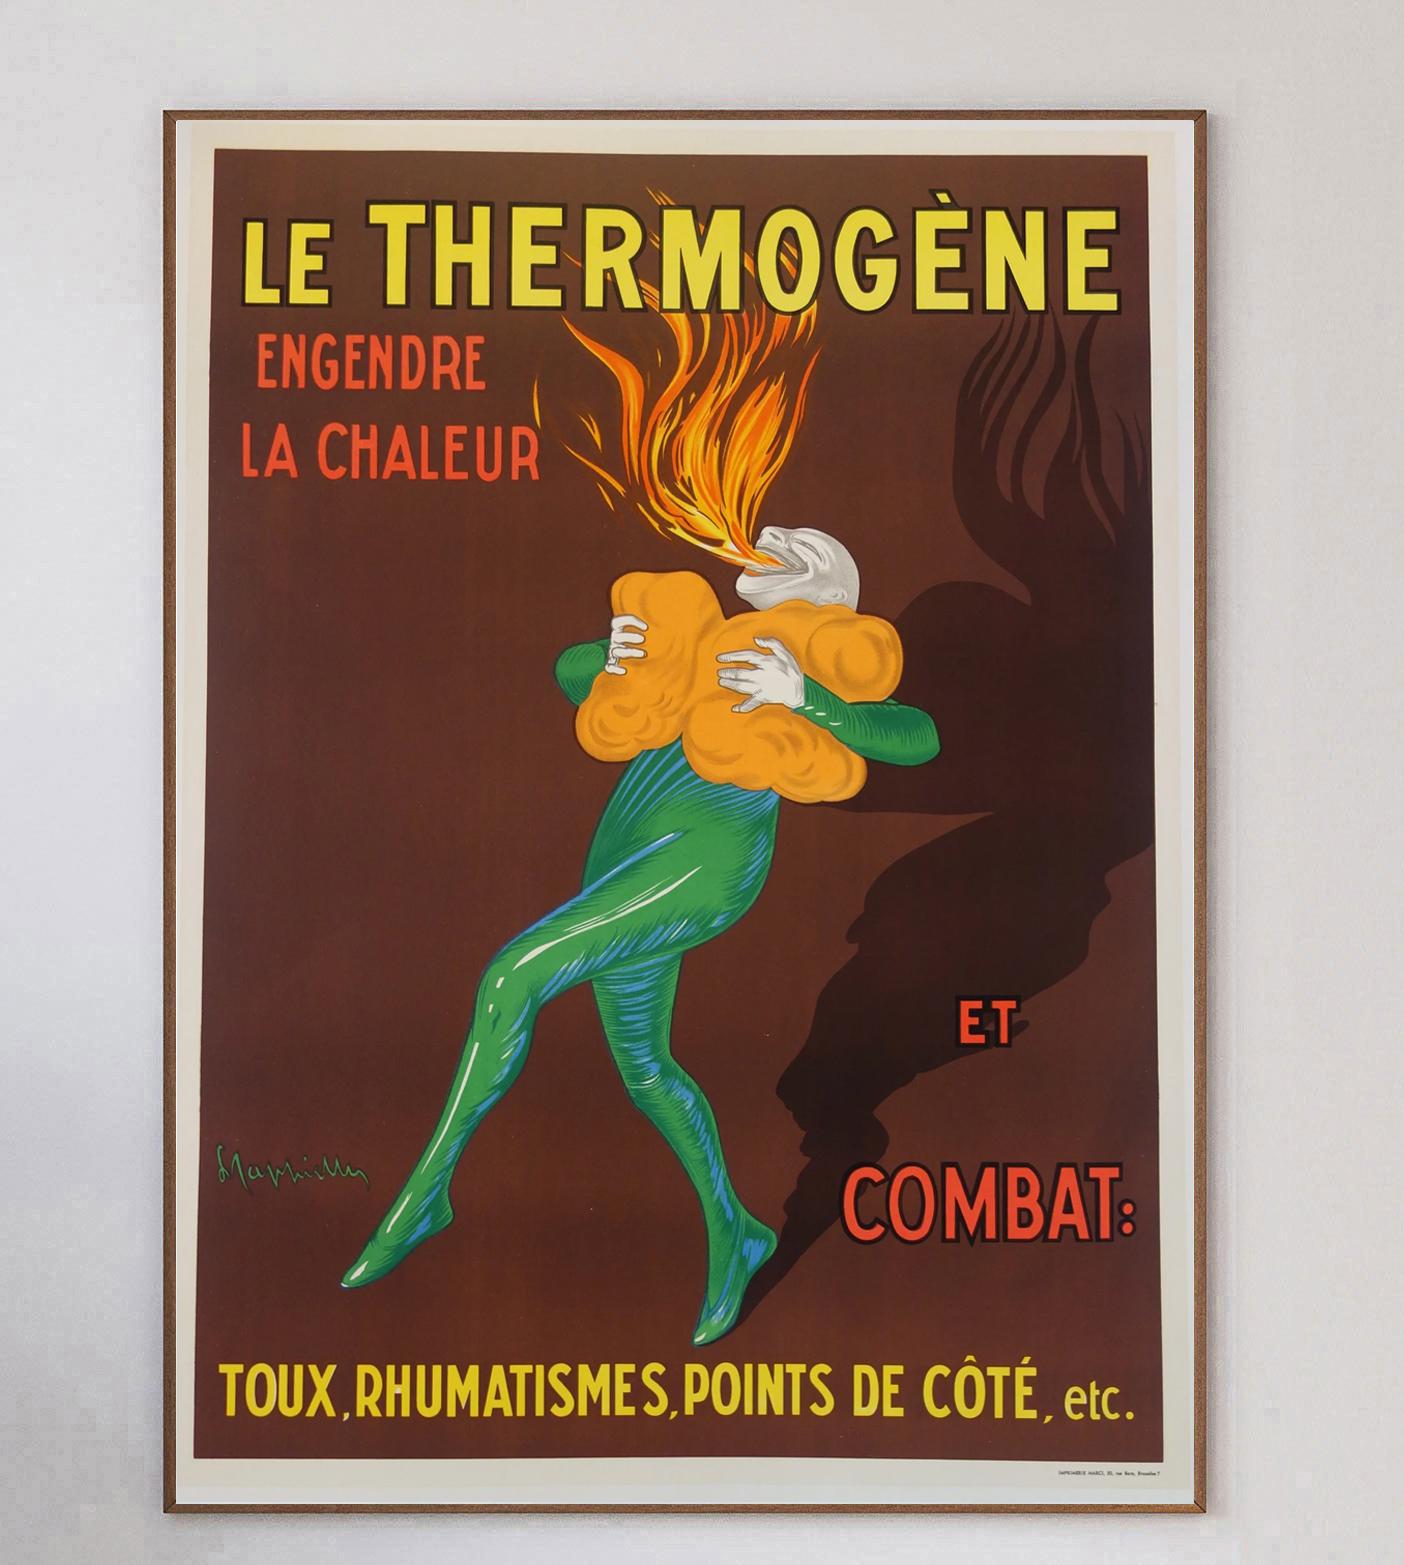 Depicting a clown breathing fire holding the product, this stunning poster for 